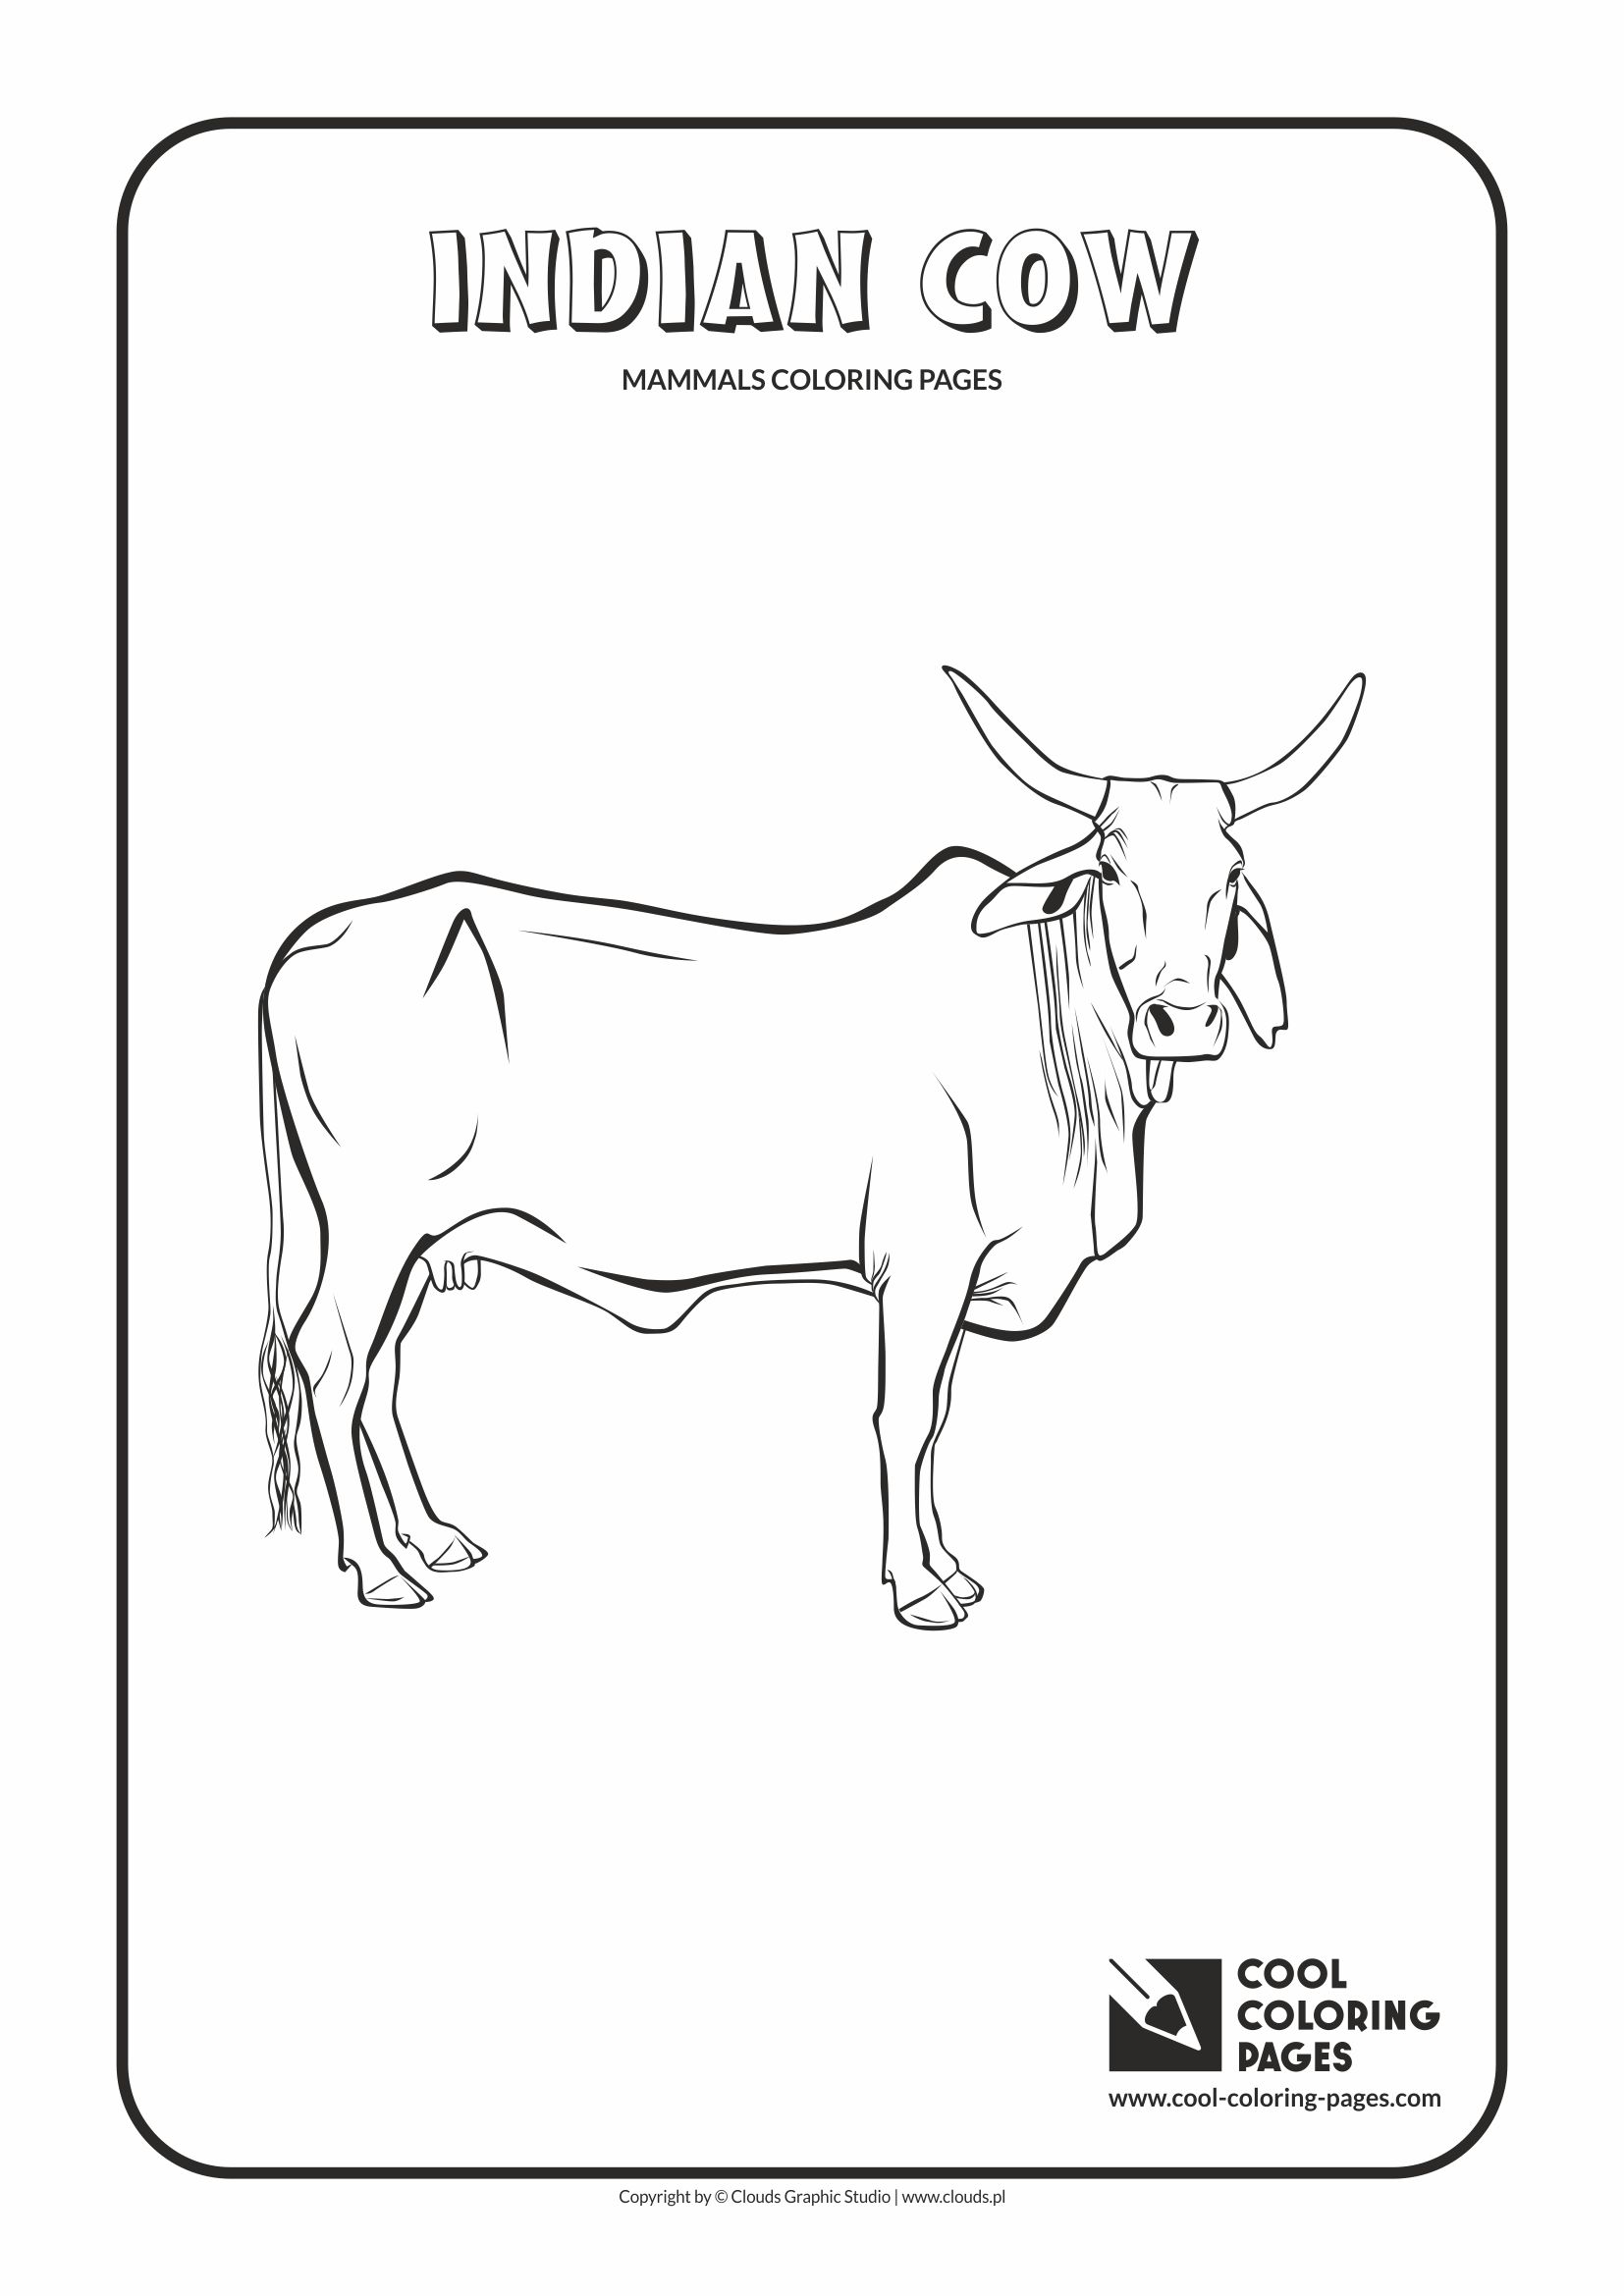 Cool Coloring Pages Indian cow coloring page - Cool Coloring Pages